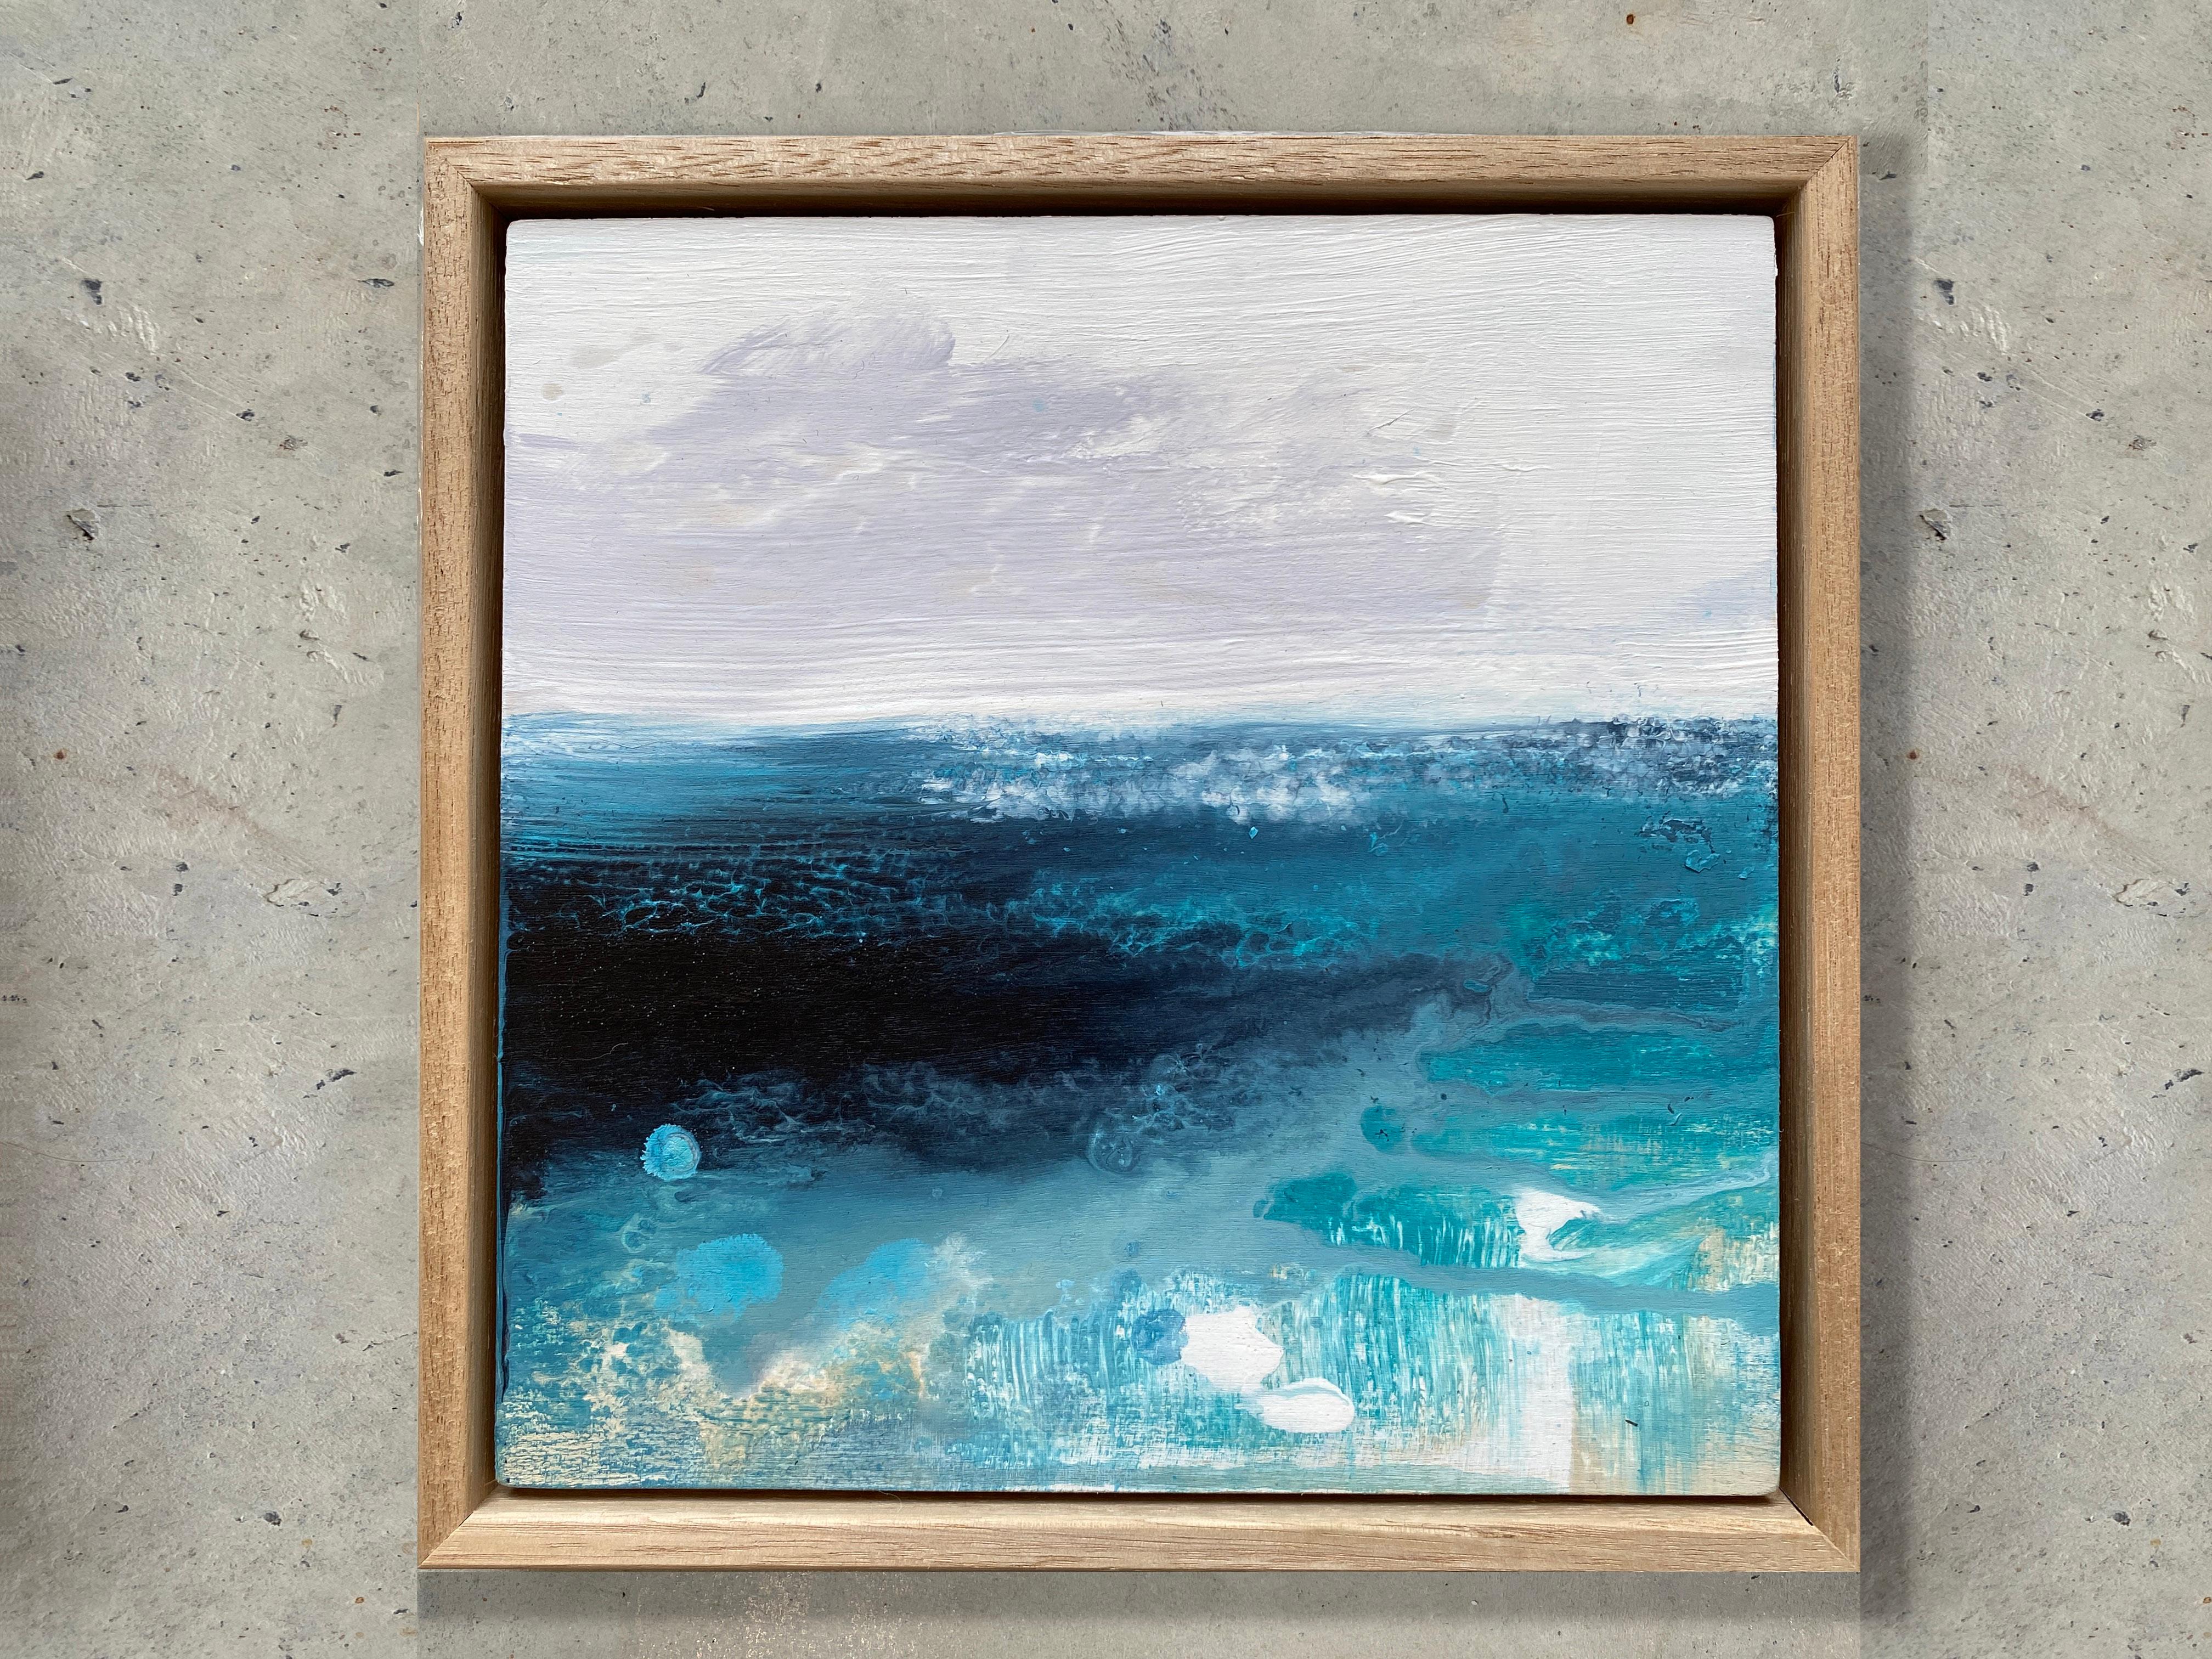 A small sweet work of Australian beach inspiration, descriptive cloudy skies and beautiful tones of beautiful blue ocean waters
to uplift and refresh any room.

Painted in soft coastal tones of sky blue, deep ocean blue, sand, mist grey and white.